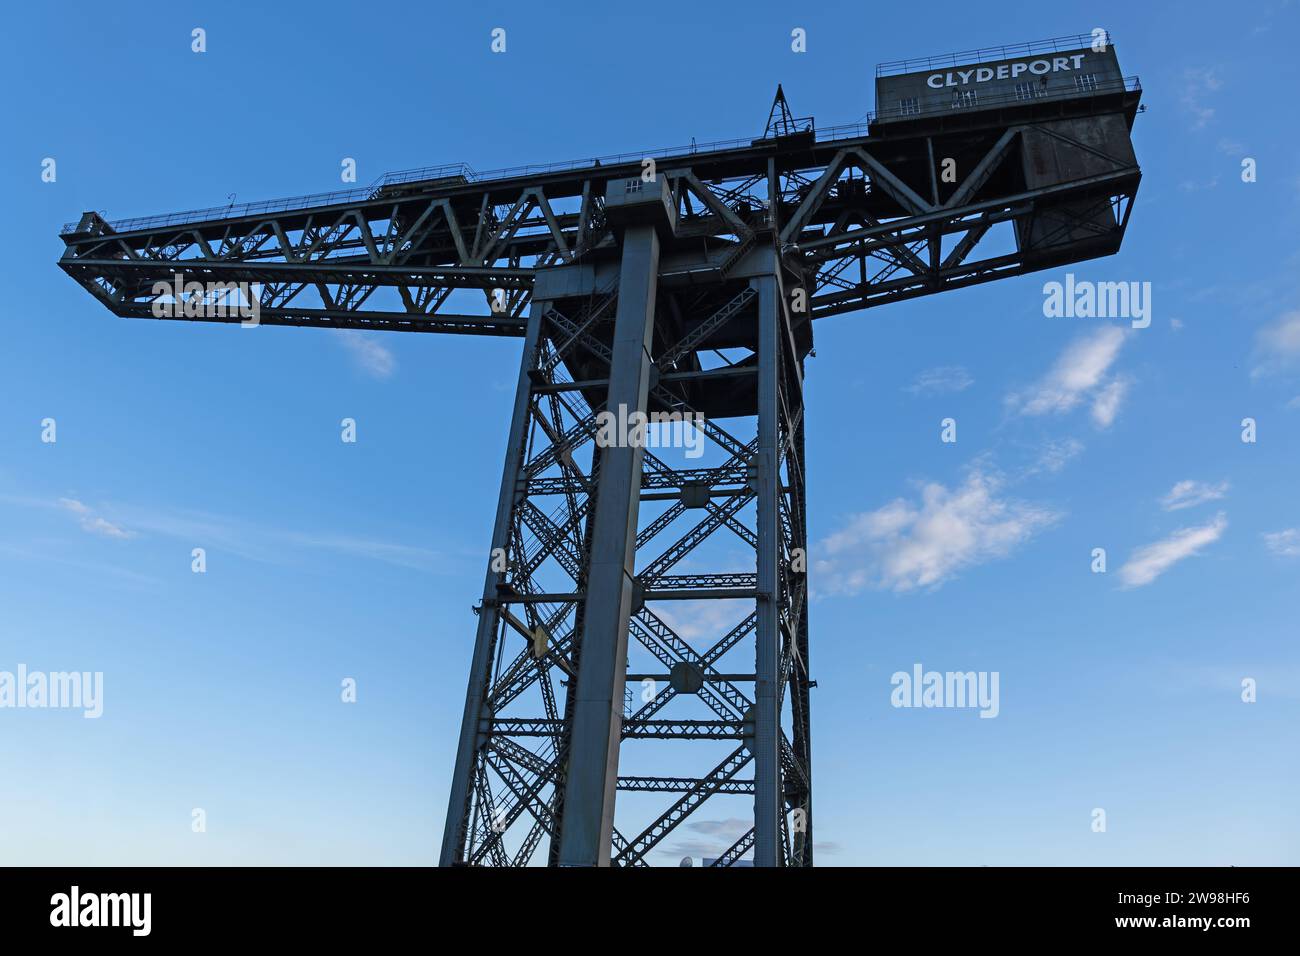 The Finnieston Crane in city of Glasgow, Scotland, UK, disused giant cantilever crane from 1931. Stock Photo